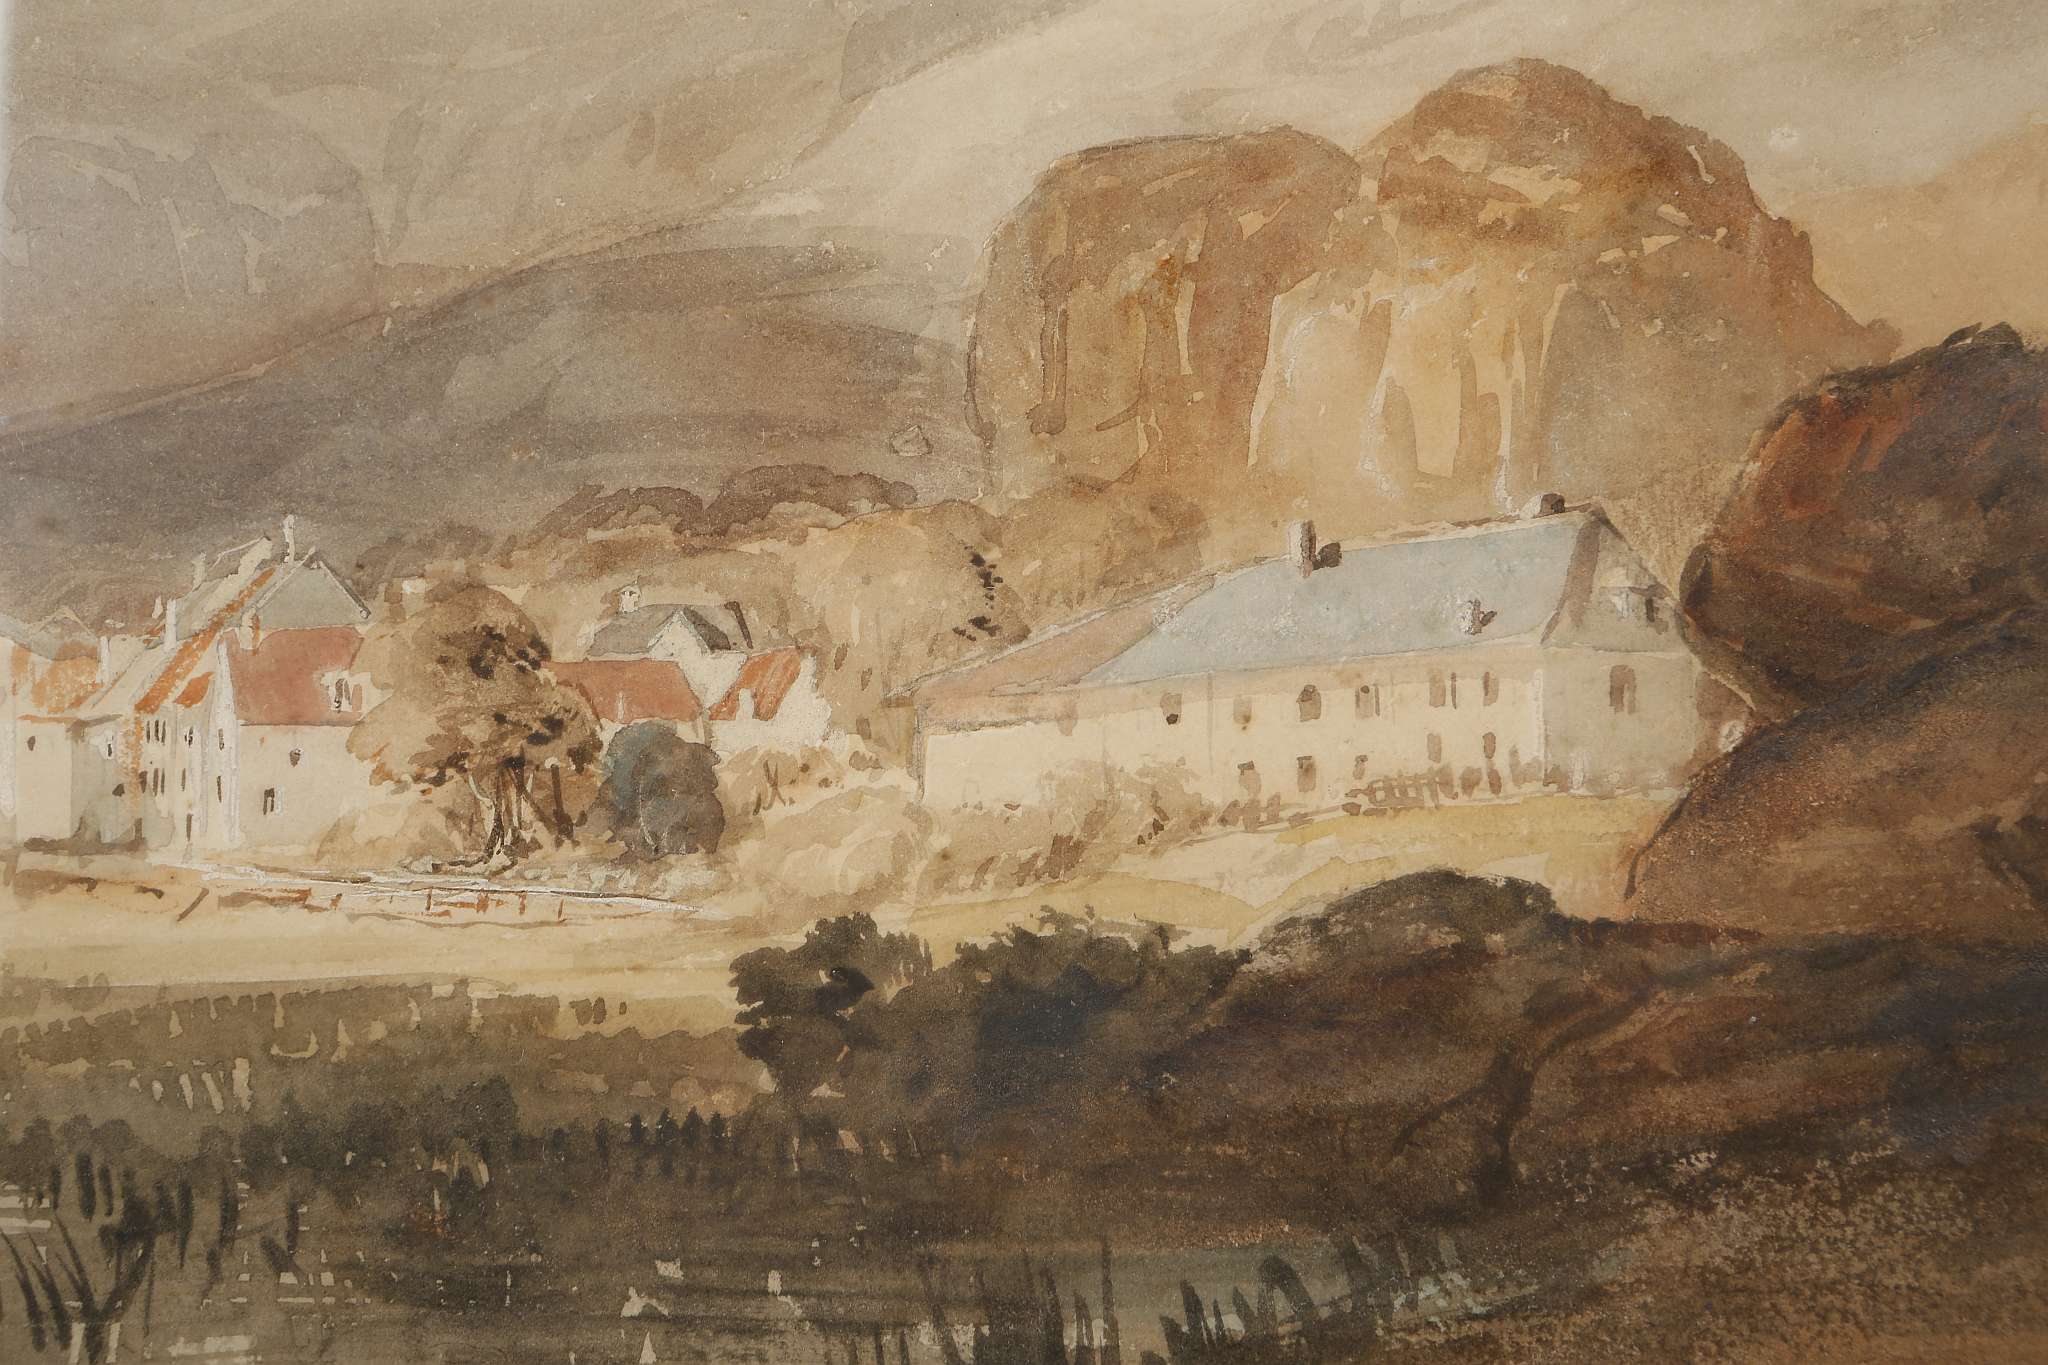 Louis Haghe 1806-1885, 'A Village in the Landscape', watercolour, signed lower left, mounted and - Image 2 of 7